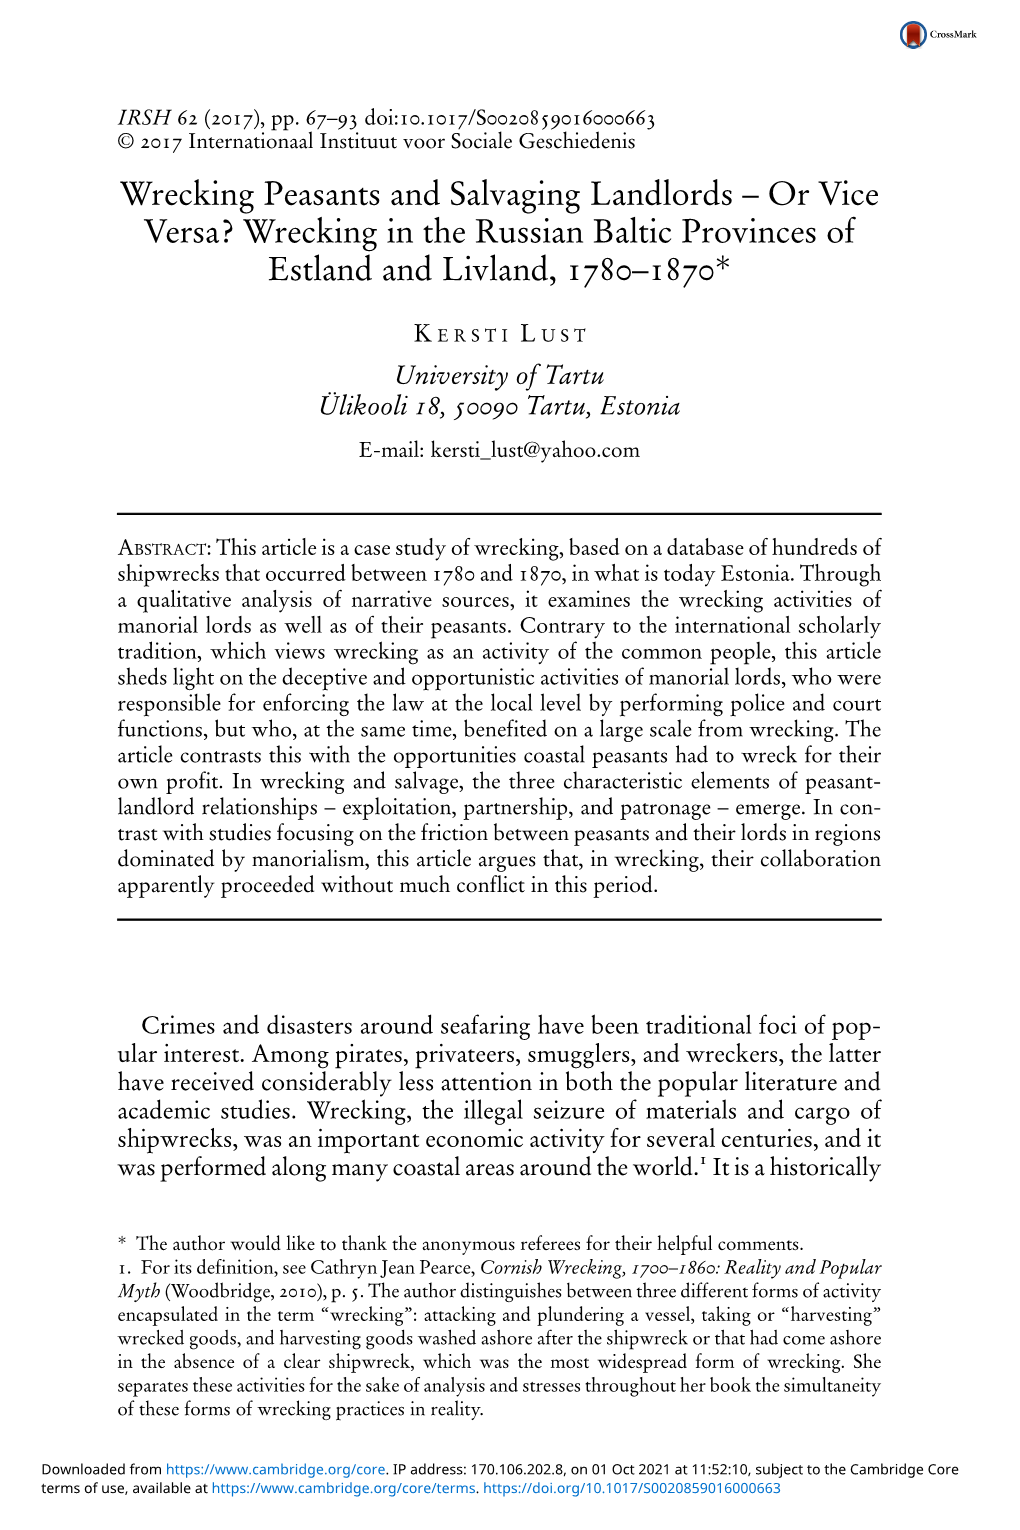 Wrecking Peasants and Salvaging Landlords – Or Vice Versa? Wrecking in the Russian Baltic Provinces of Estland and Livland, 1780–1870*